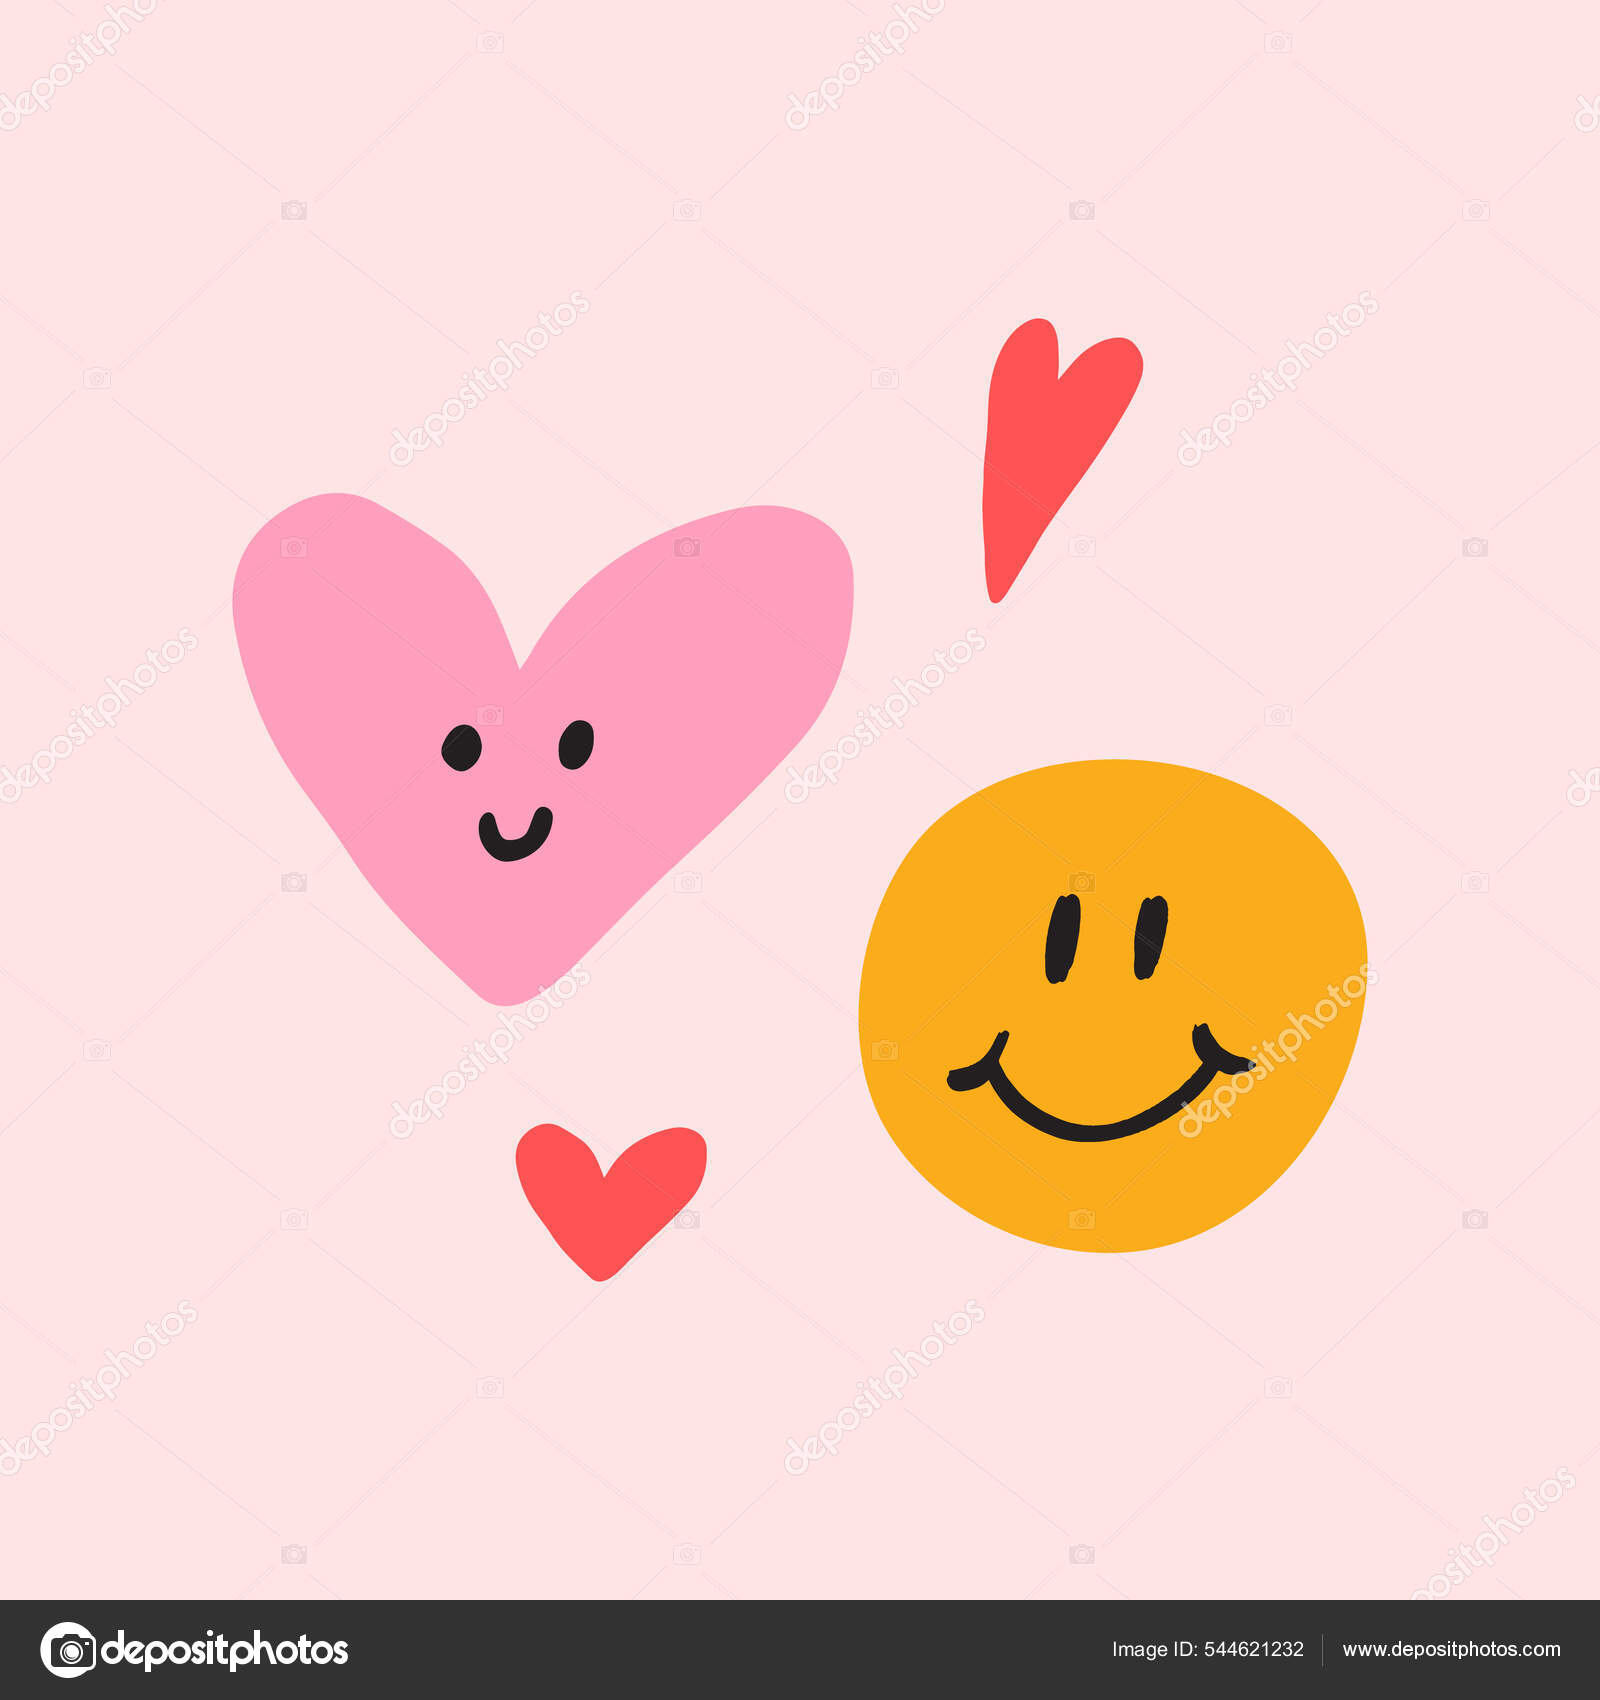 Cute social media Emoji smiling face with heart-eyes on pink background -  stock illustration